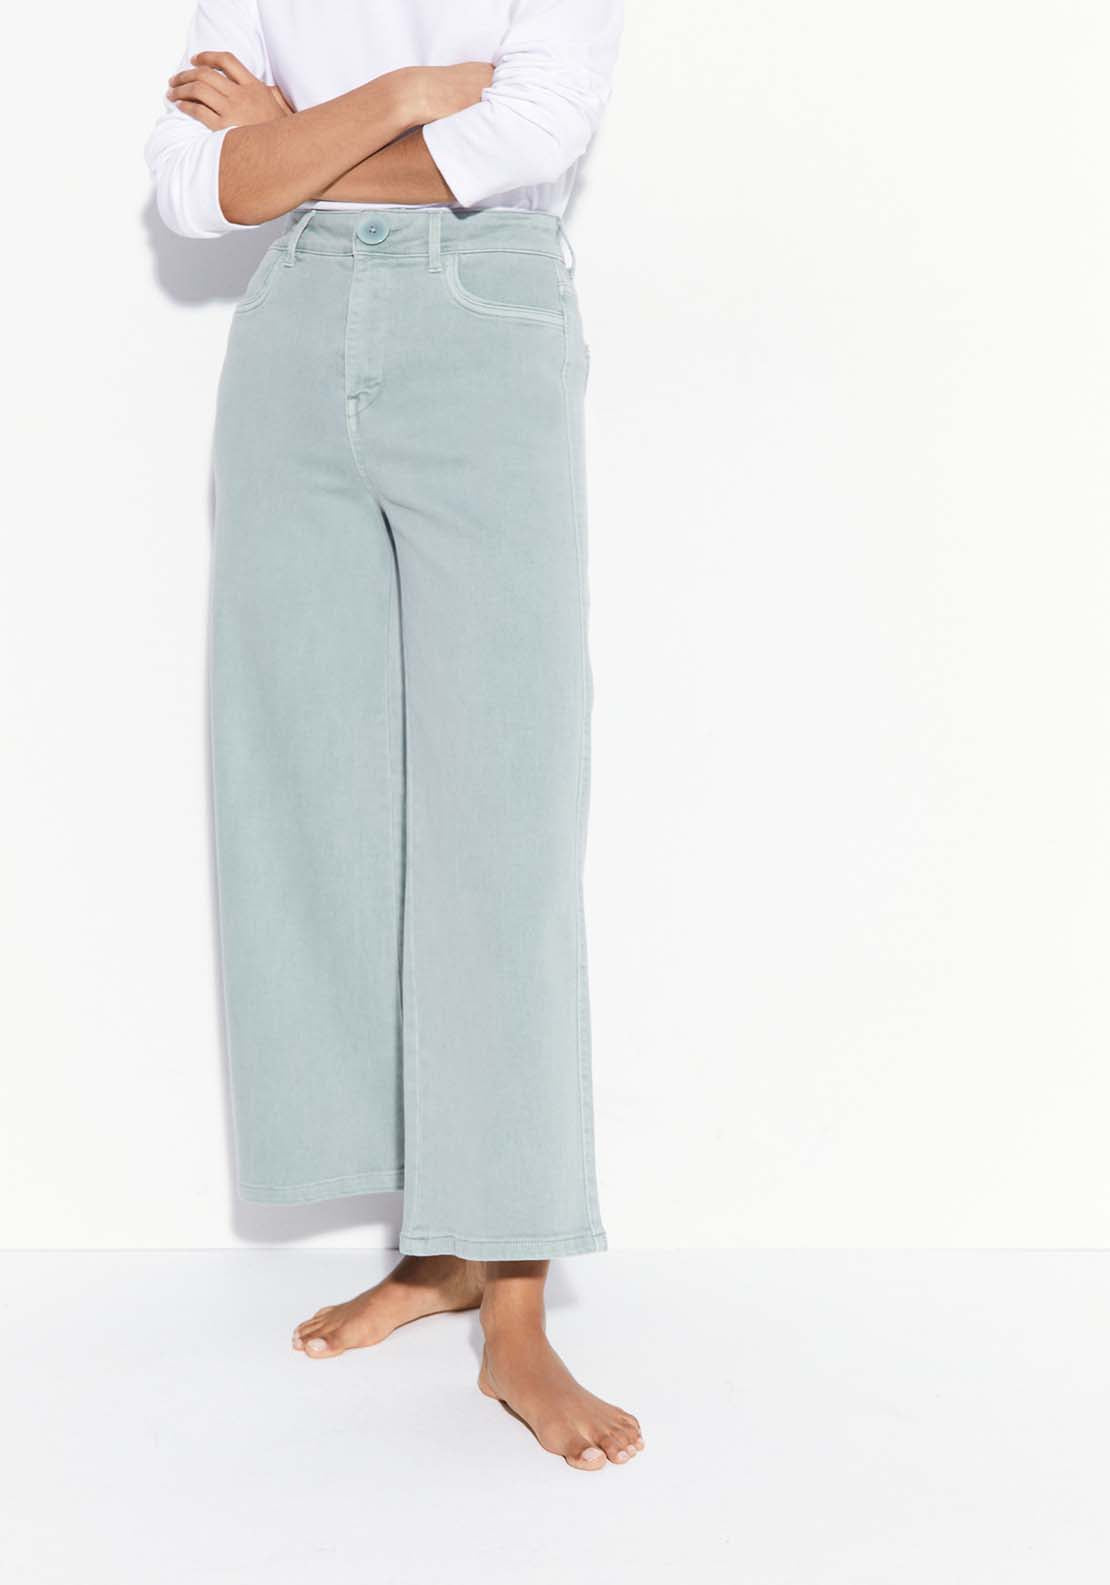 Sfera Culotte Jeans 1 Shaws Department Stores